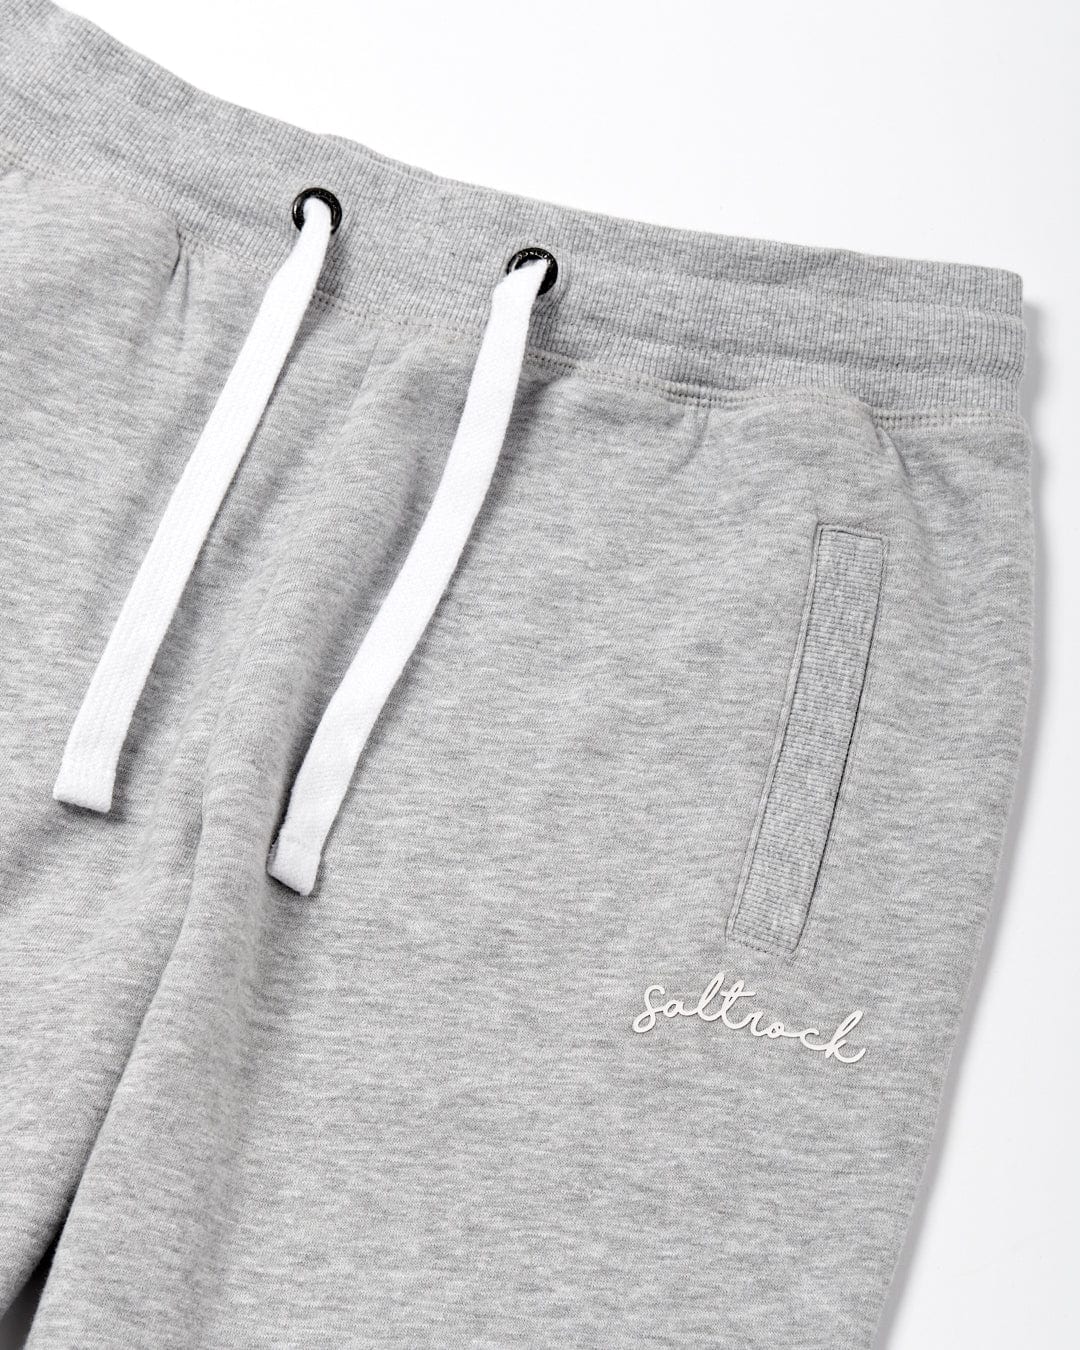 Saltrock Velator - Women's Jogger - Light Grey sweatpants with white drawstrings and a 'Saltrock' logo on the left thigh. These also feature an elasticated draw cord waist for a comfortable fit.